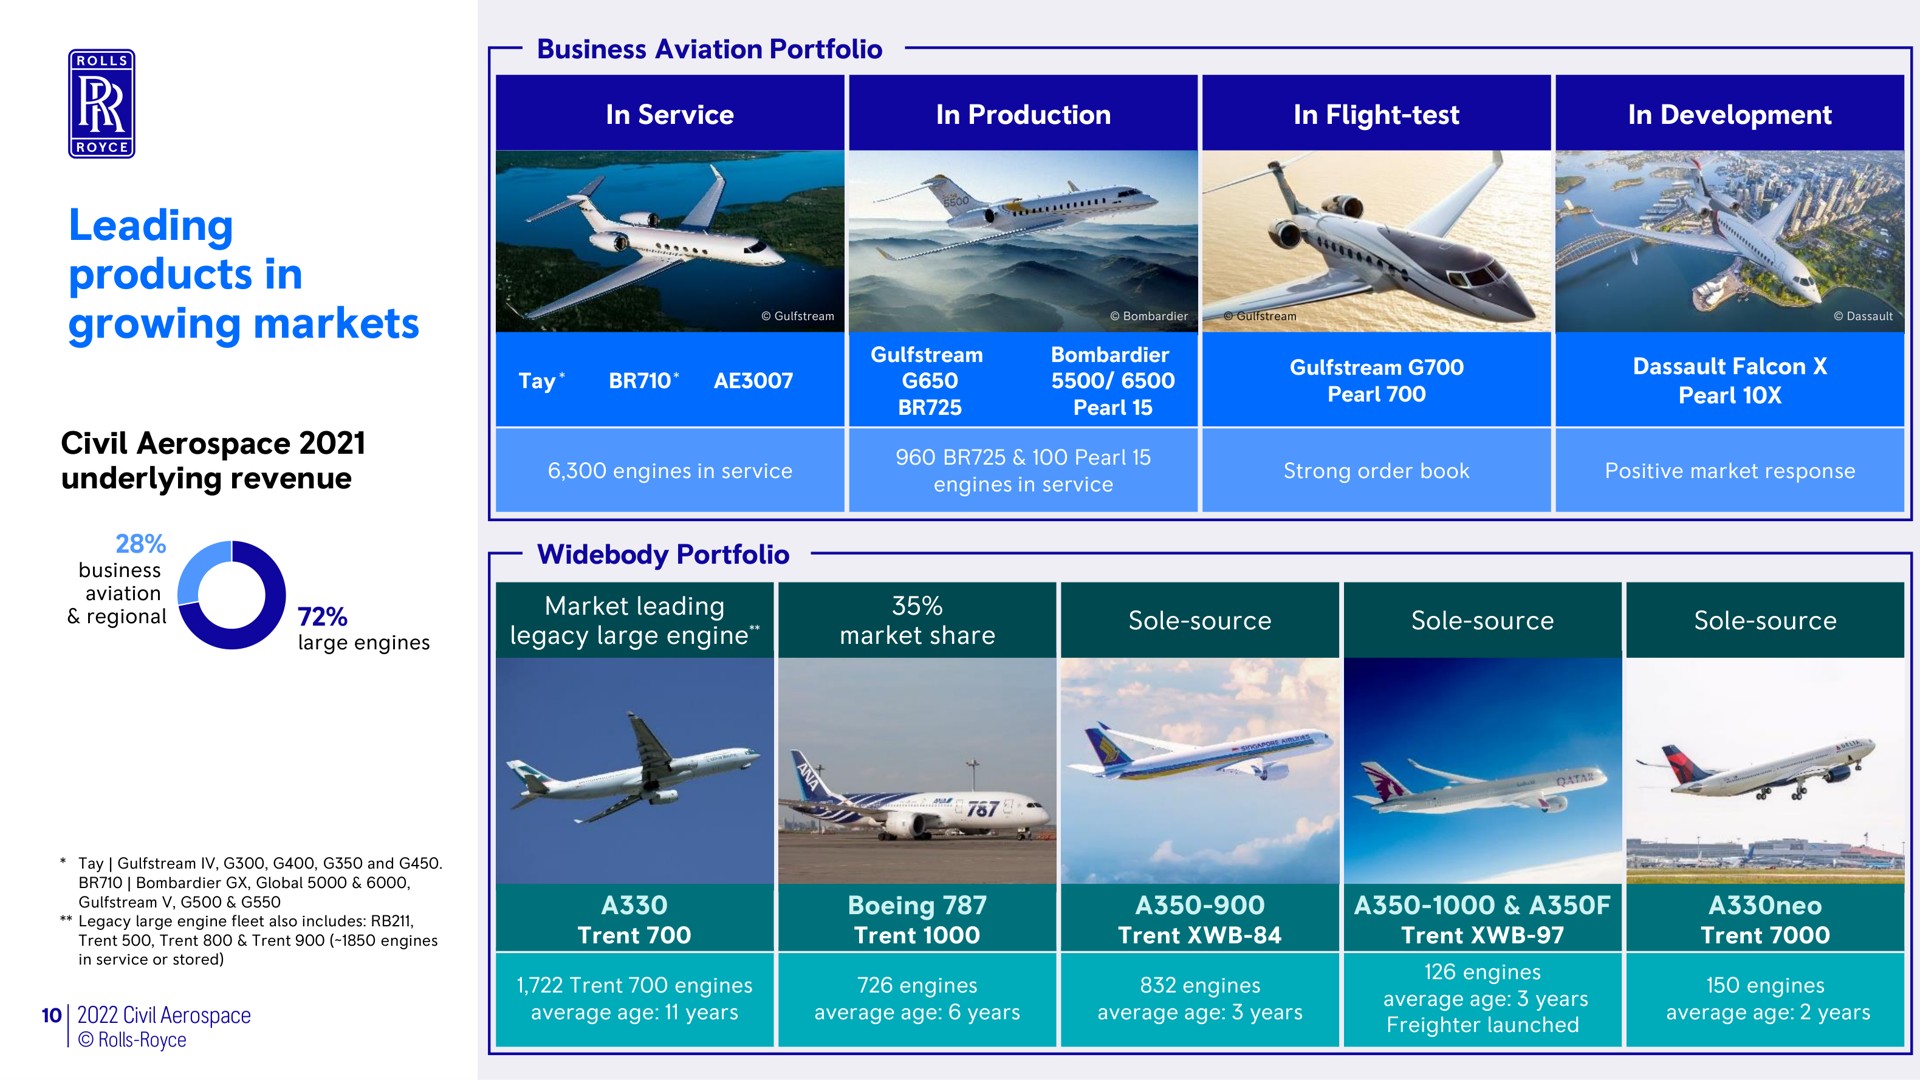 leading products in growing markets | Rolls-Royce Holdings